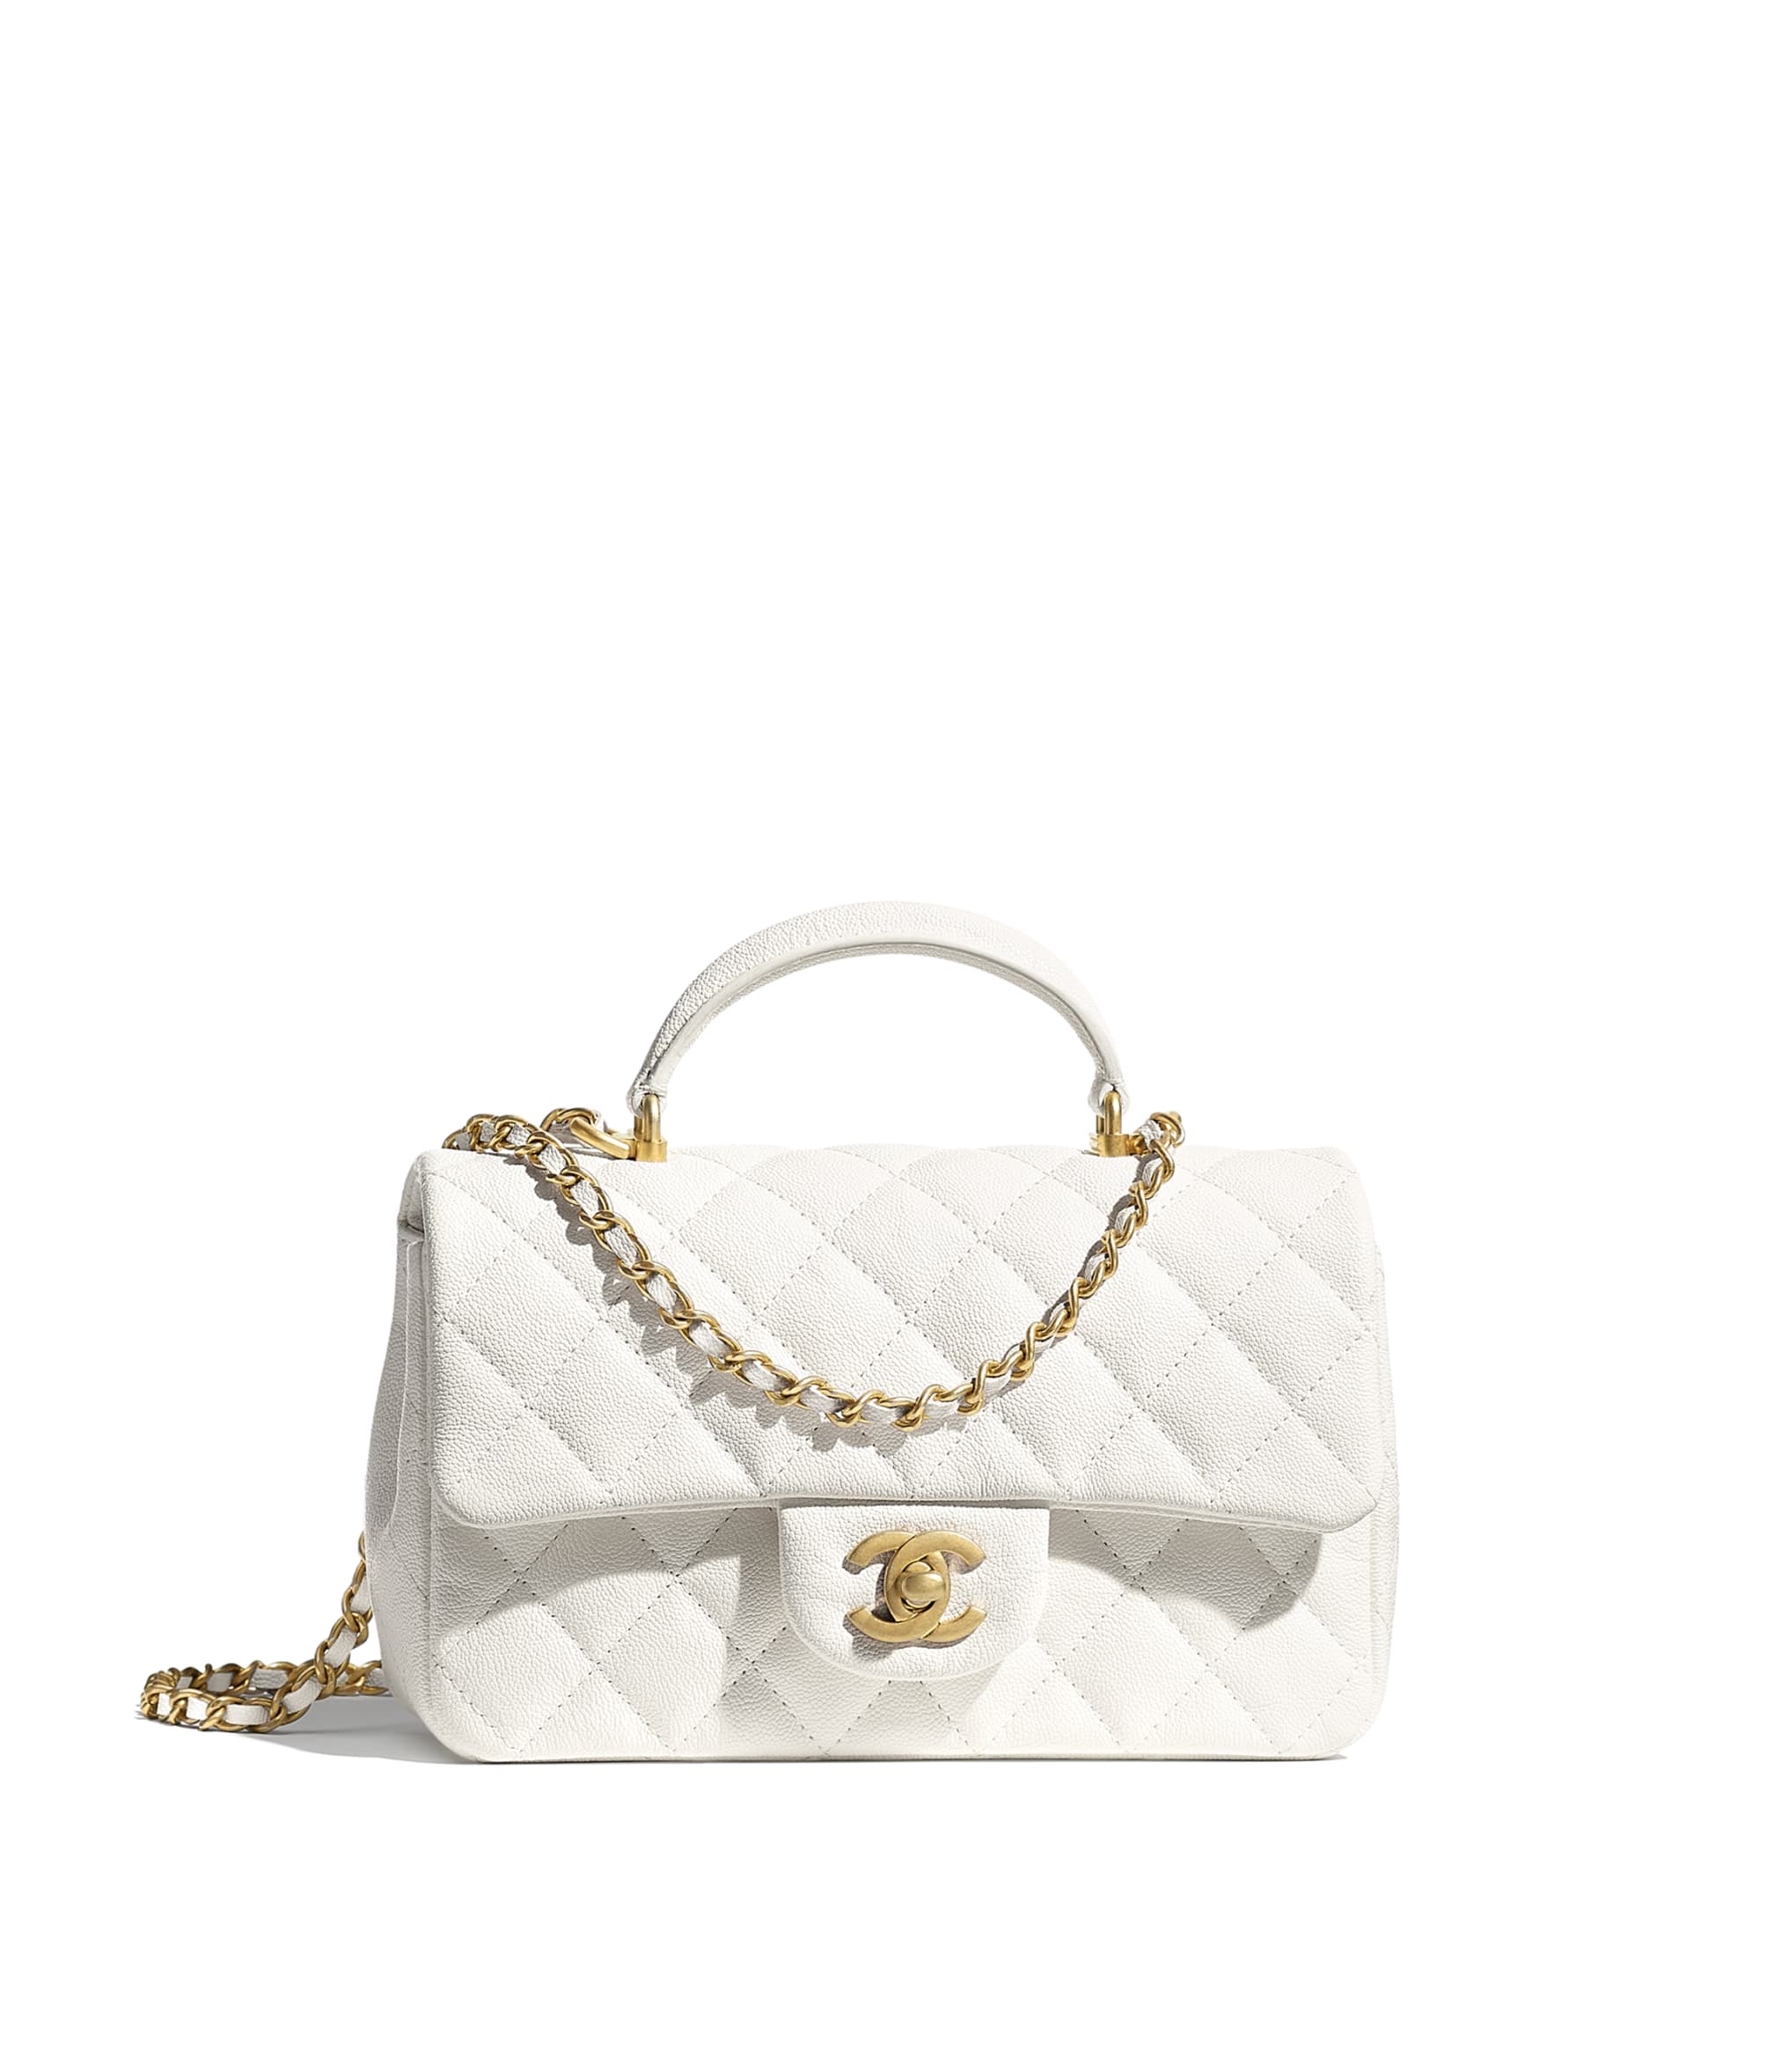 Chanel Rose Quilted Lambskin Rectangular Mini Classic Flap Bag Silver  Hardware  Madison Avenue Couture